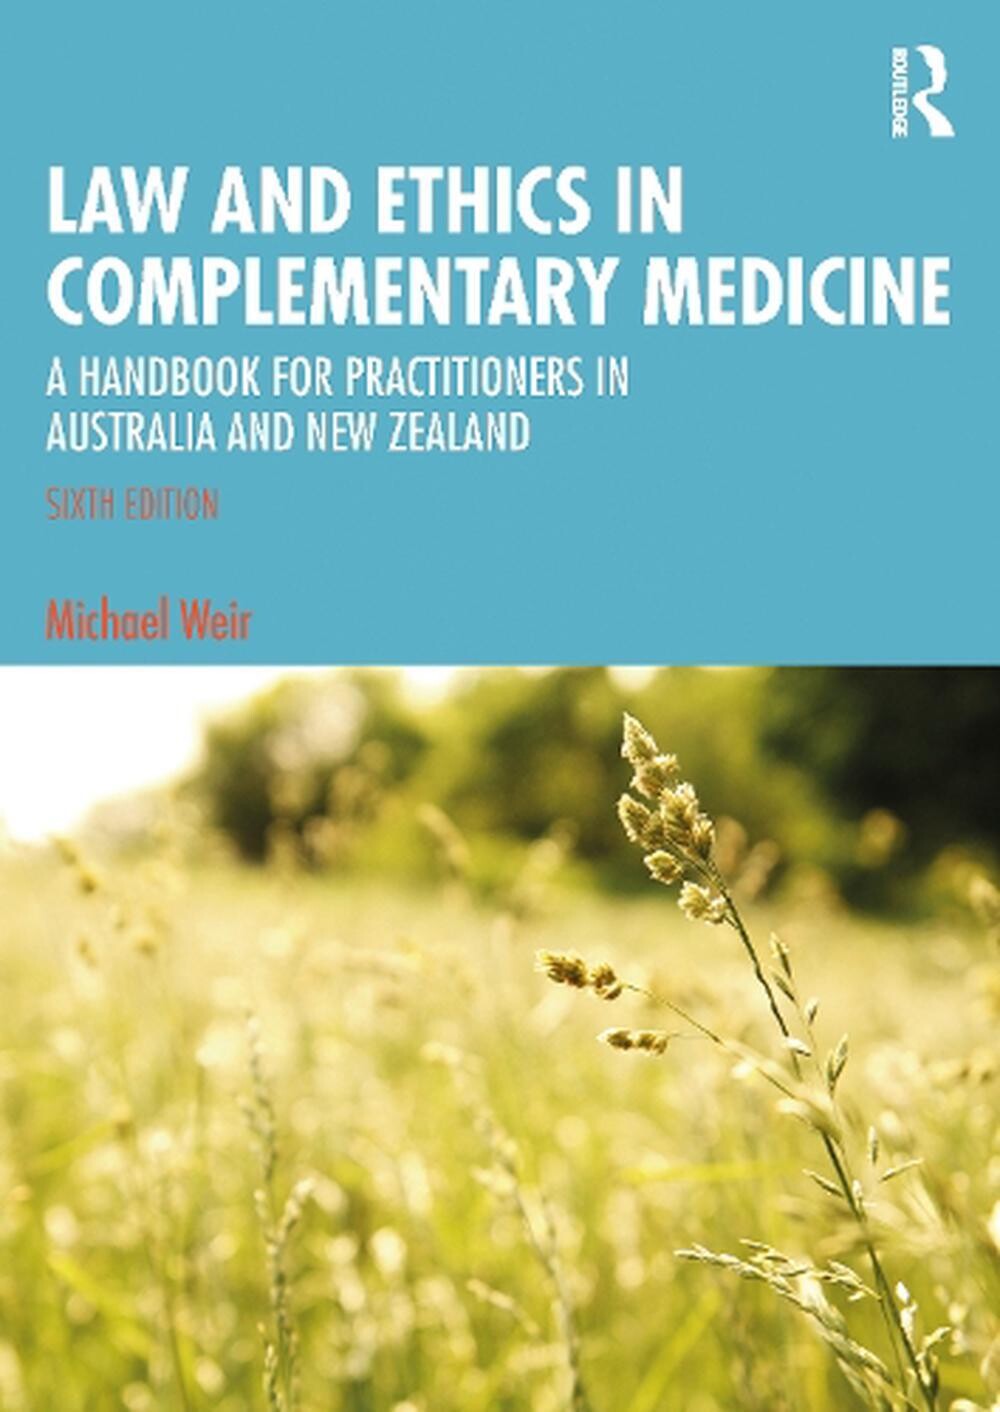 Law and Ethics in Complementary Medicine: A Handbook for Practitioners in Australia and New Zealand 6th edition (Weir)